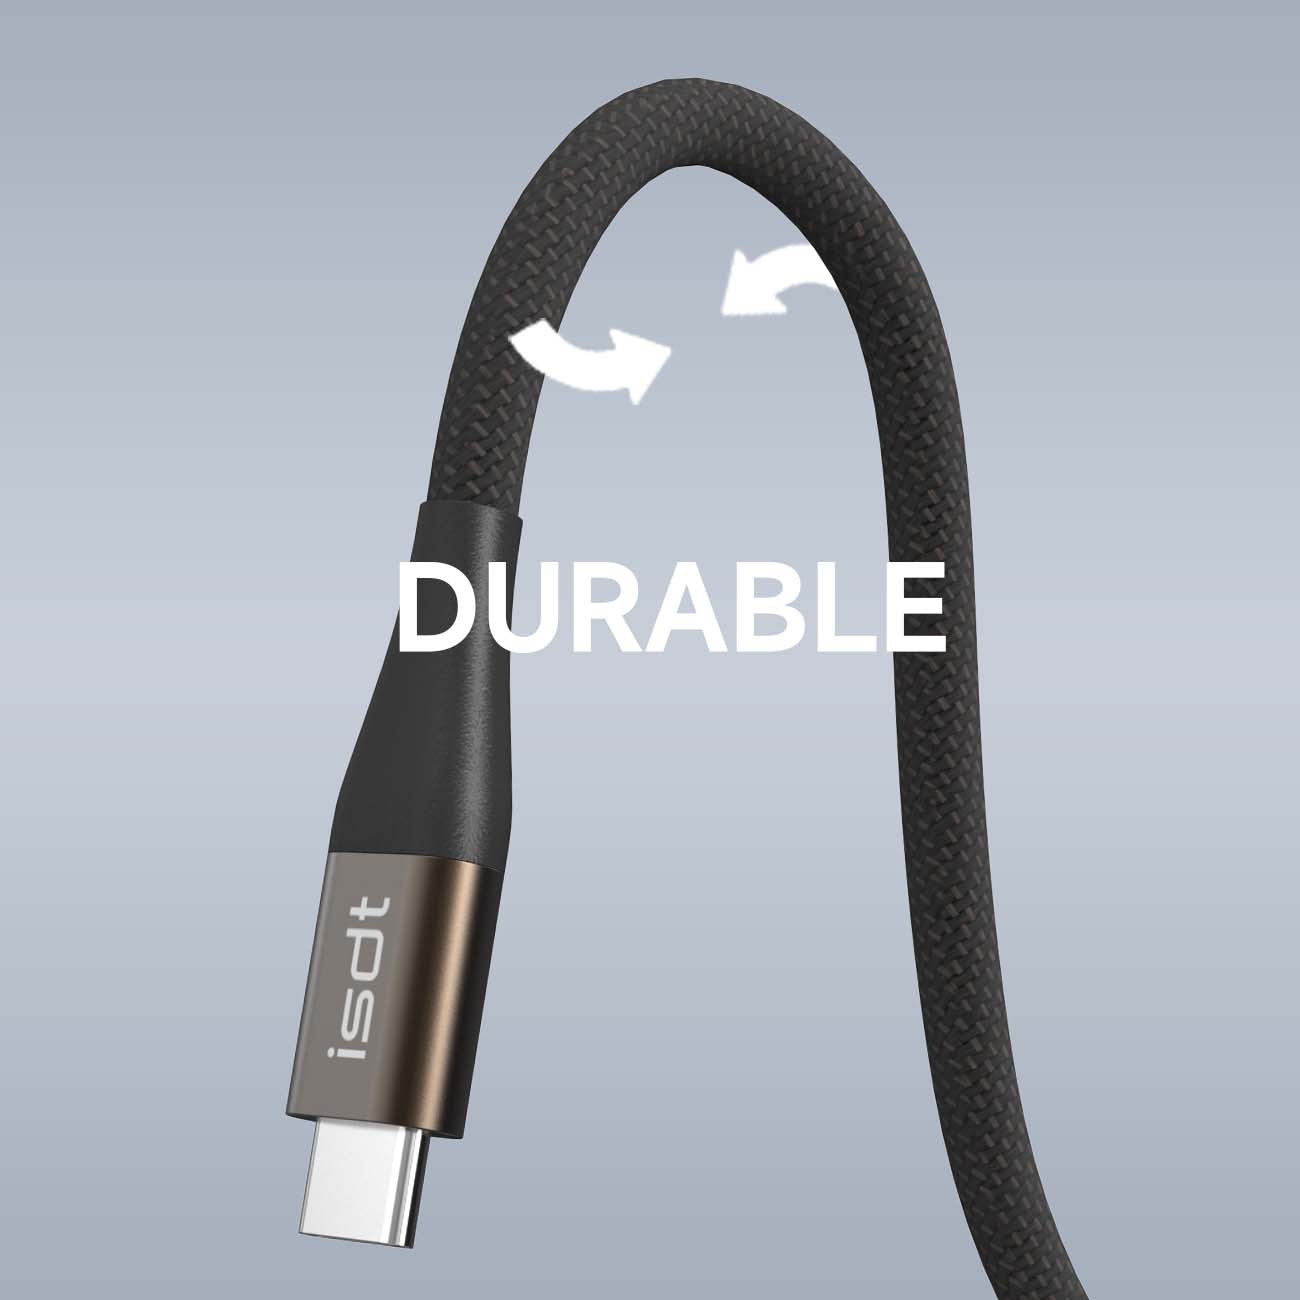 2m USB C Charging Cable Durable Cord 60W - USB-C Cables